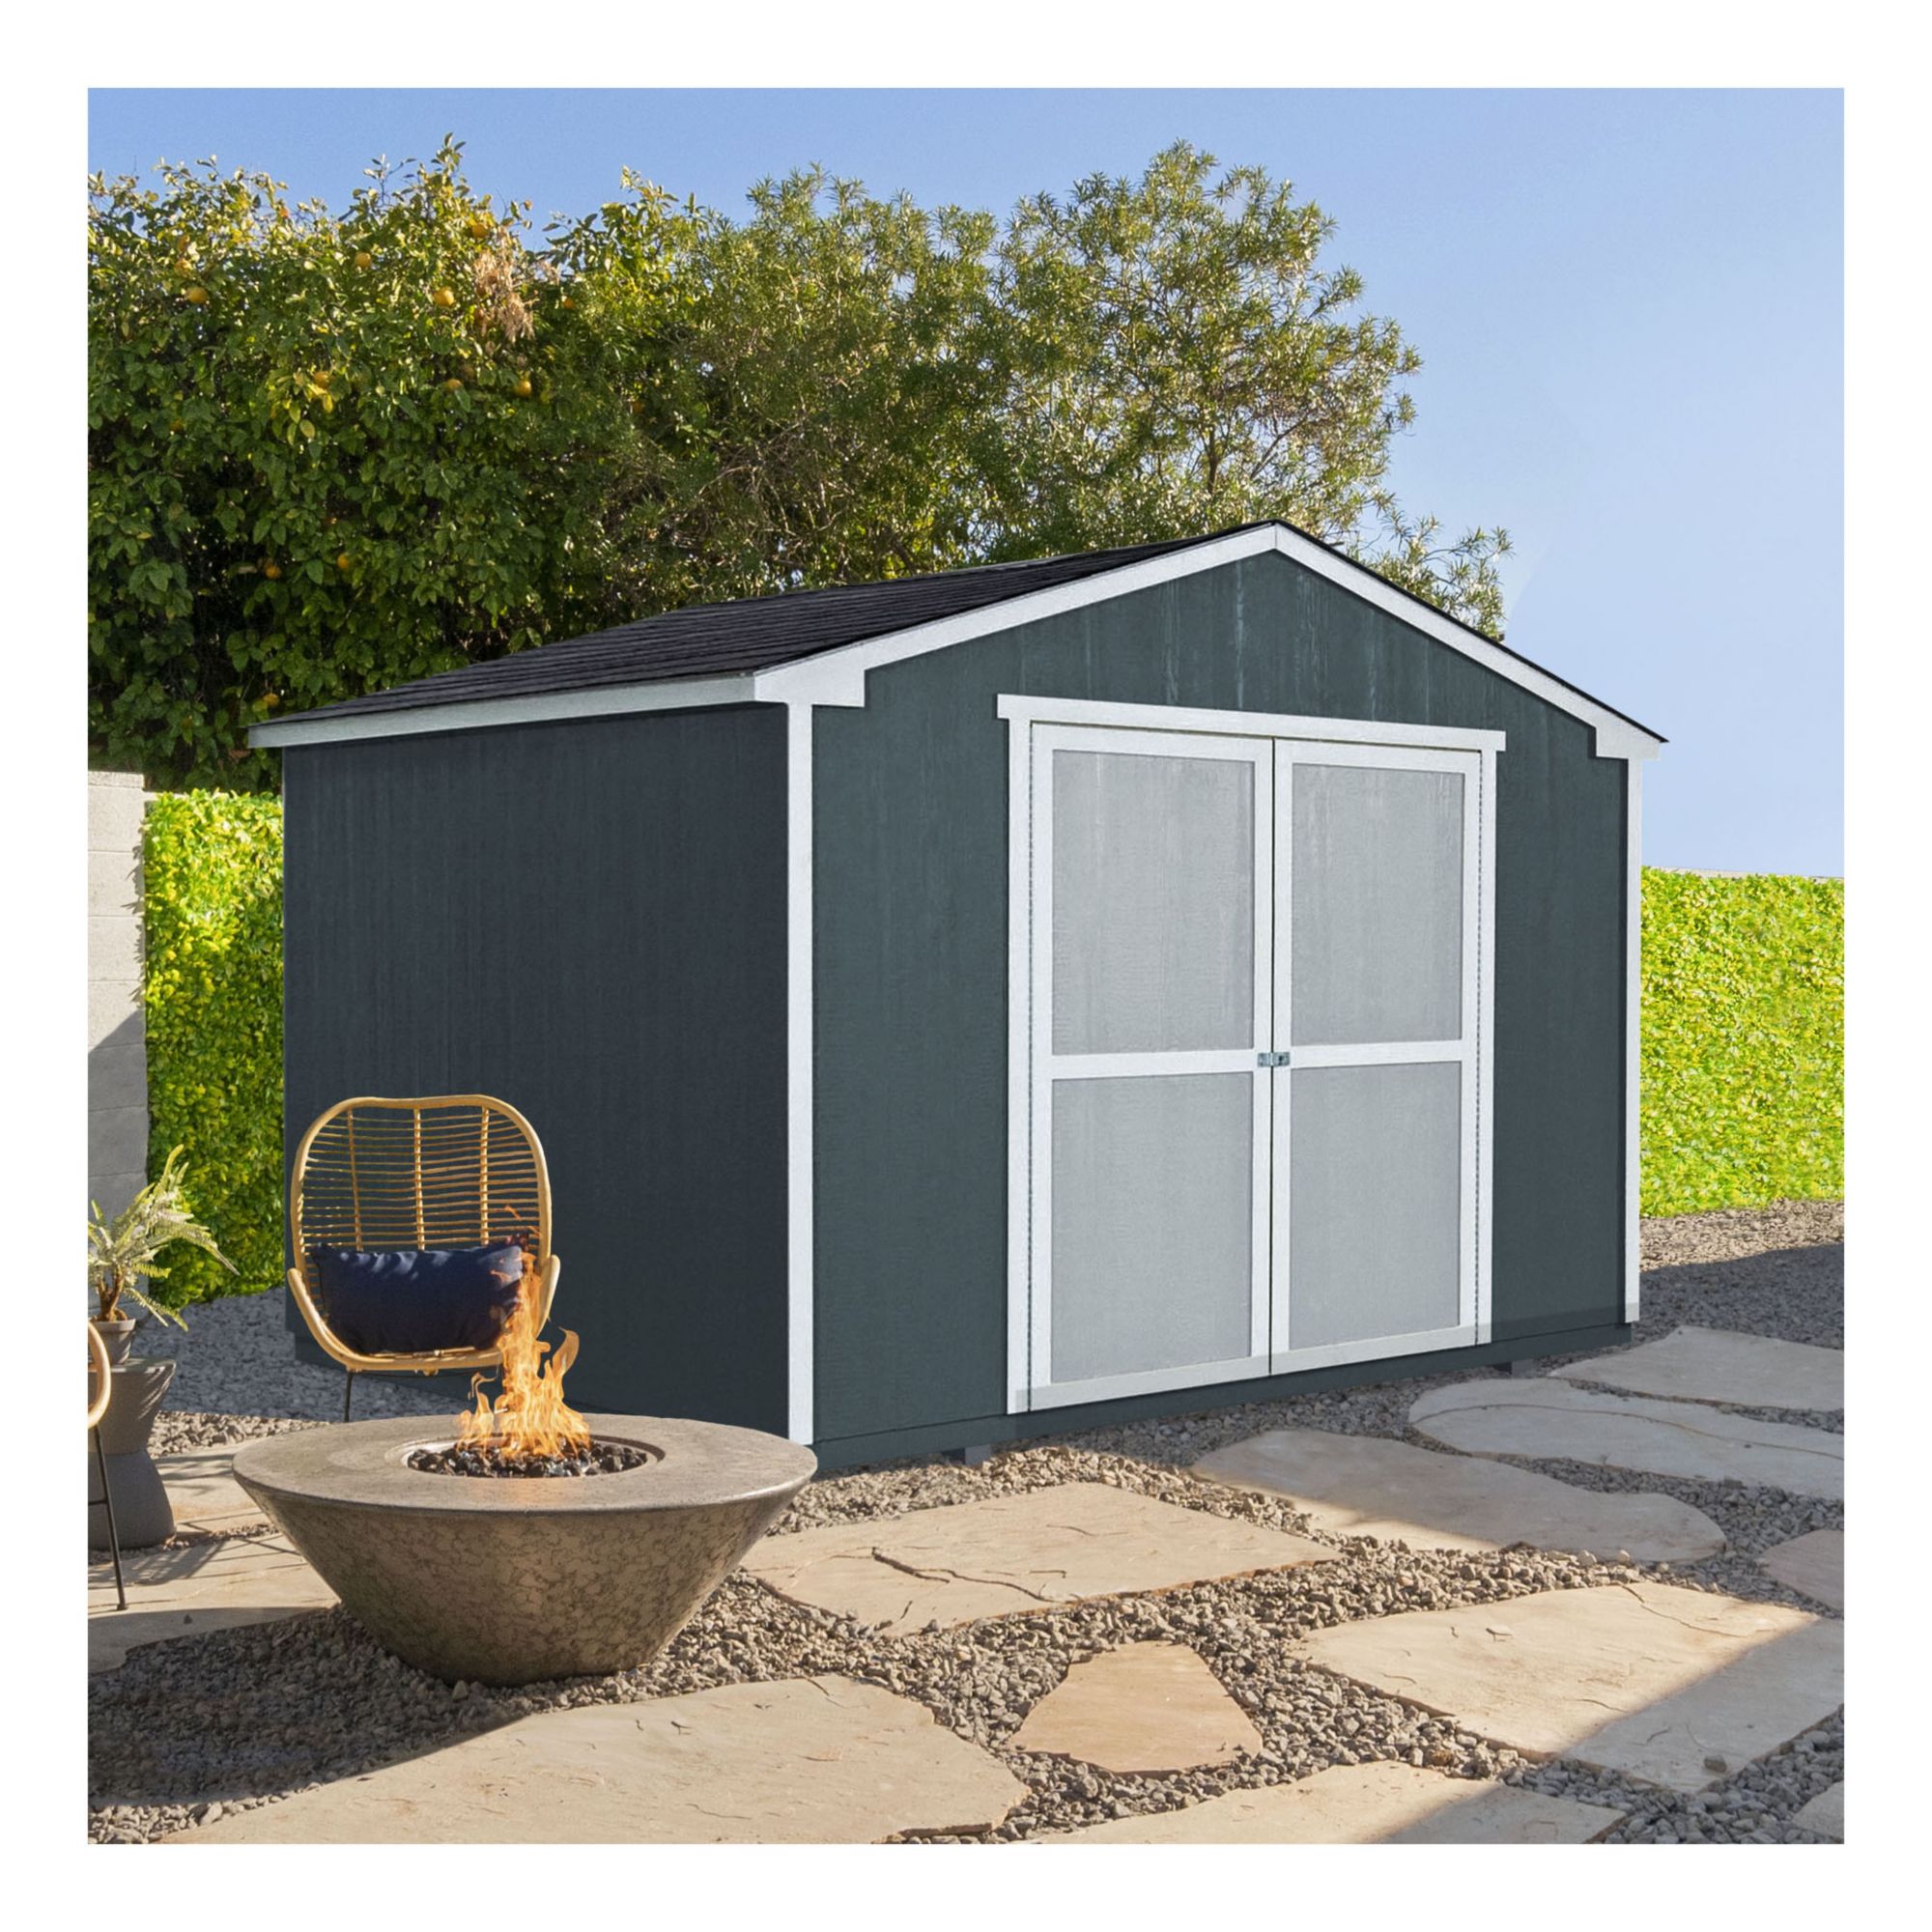 Handy Home Products Cumberland 10' x 12' Wood Storage Shed with Floor